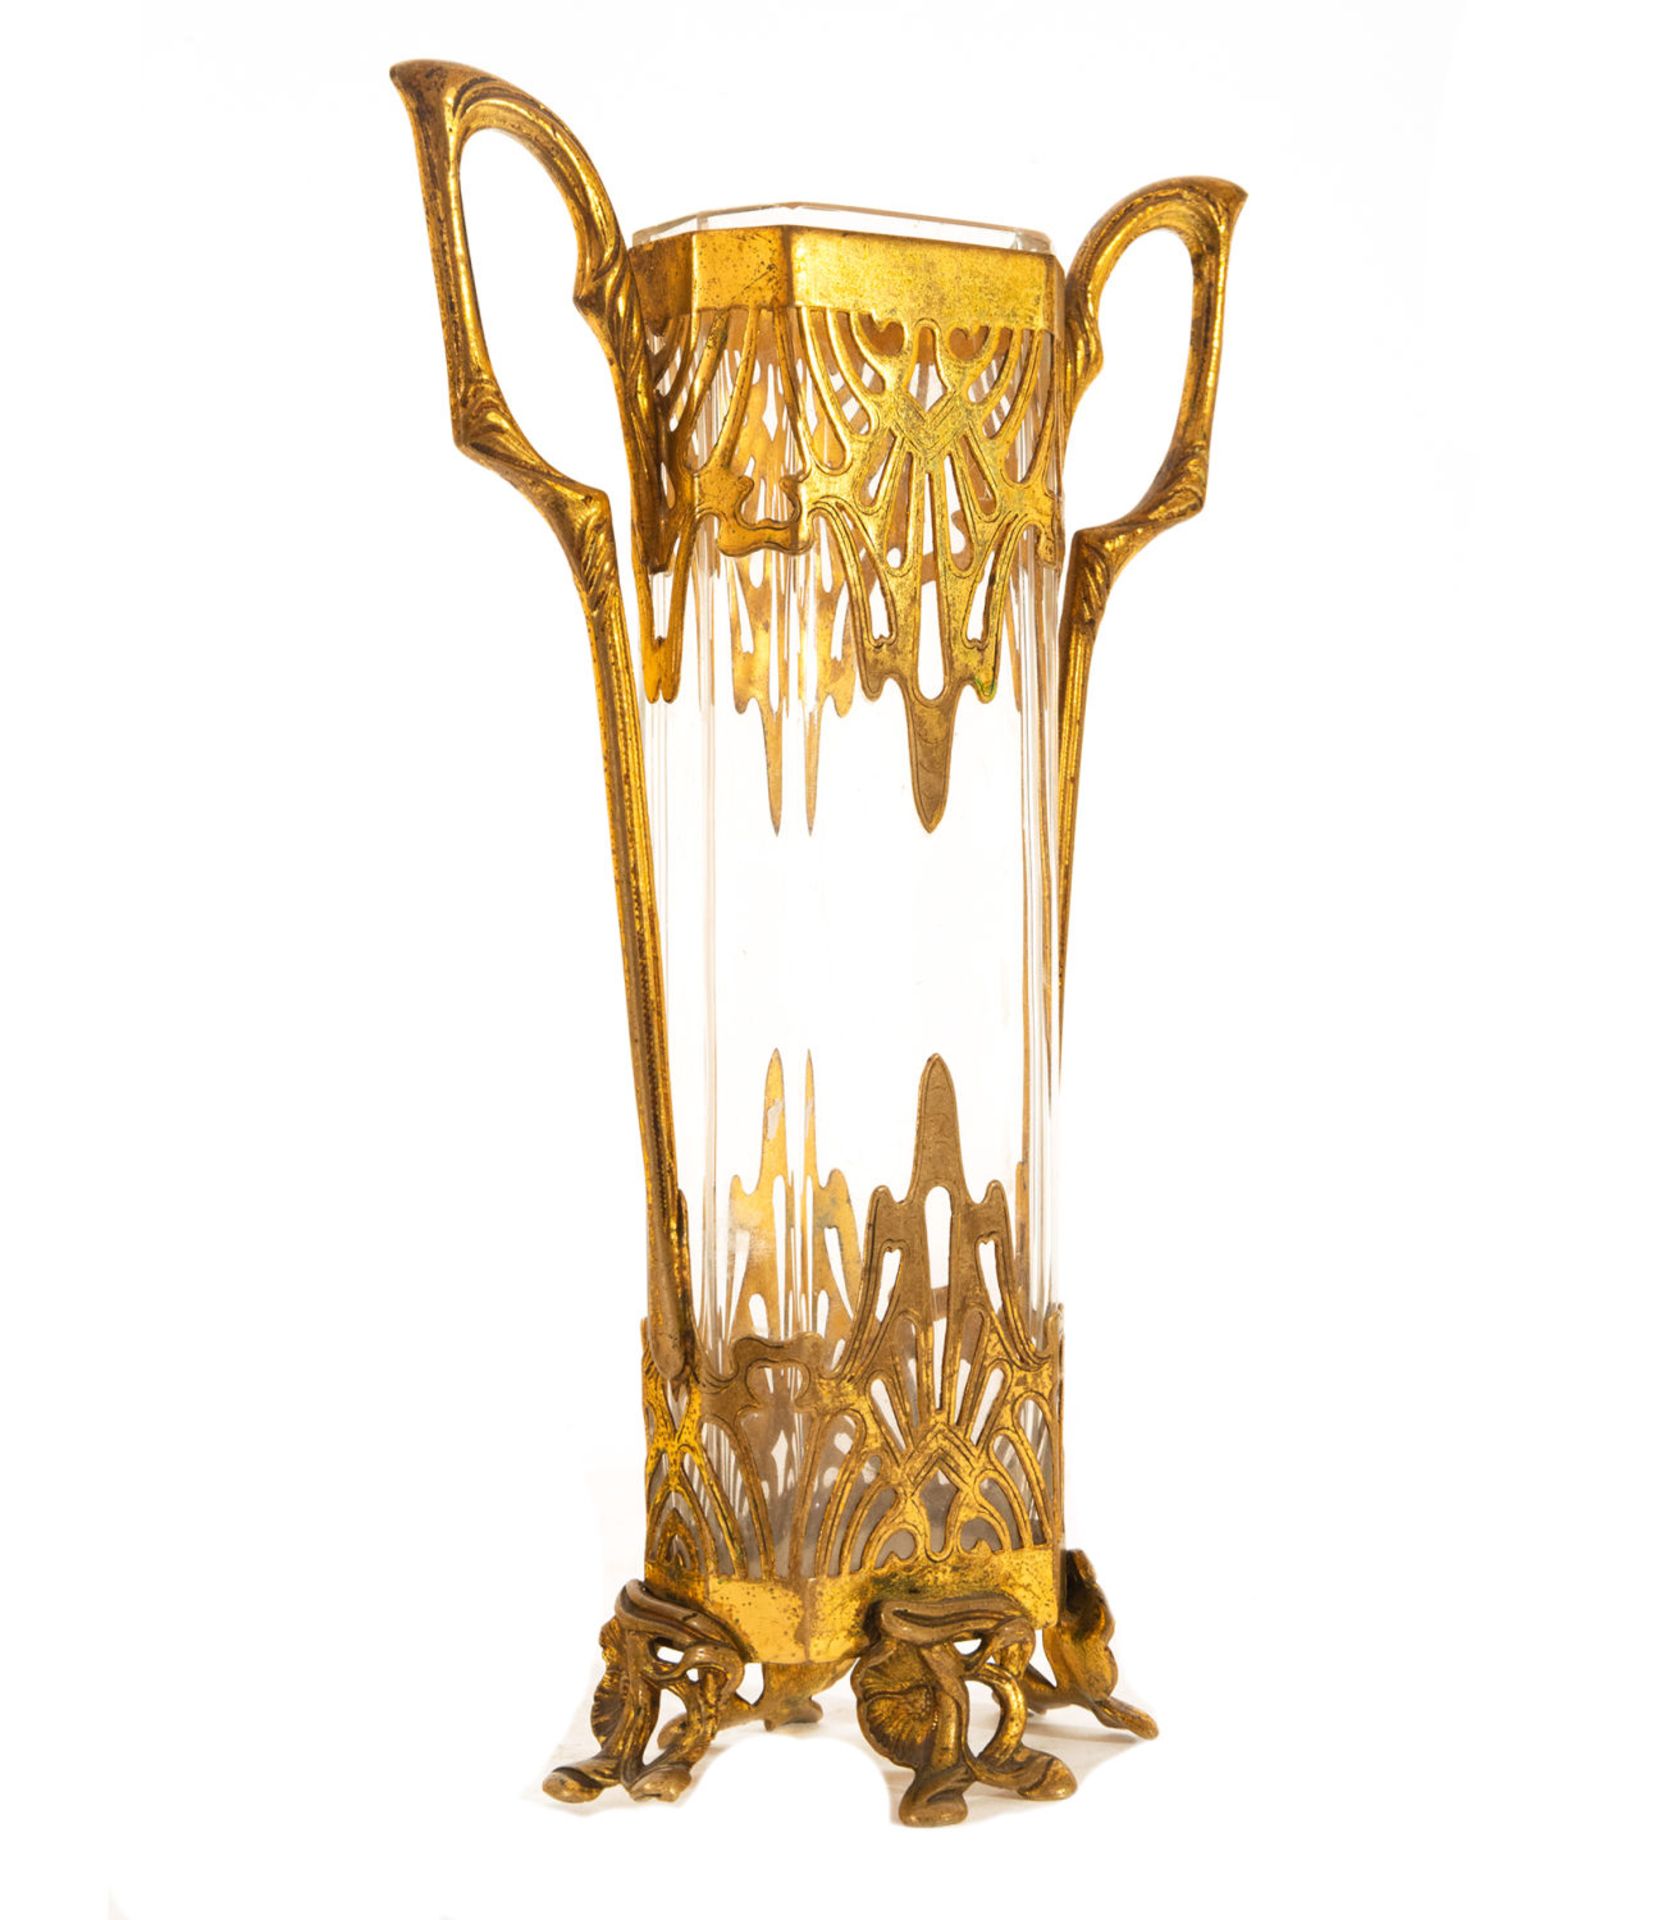 Art Nouveau Vase in Crystal and Gilt Bronze, Austria, early 20th century - Image 5 of 7